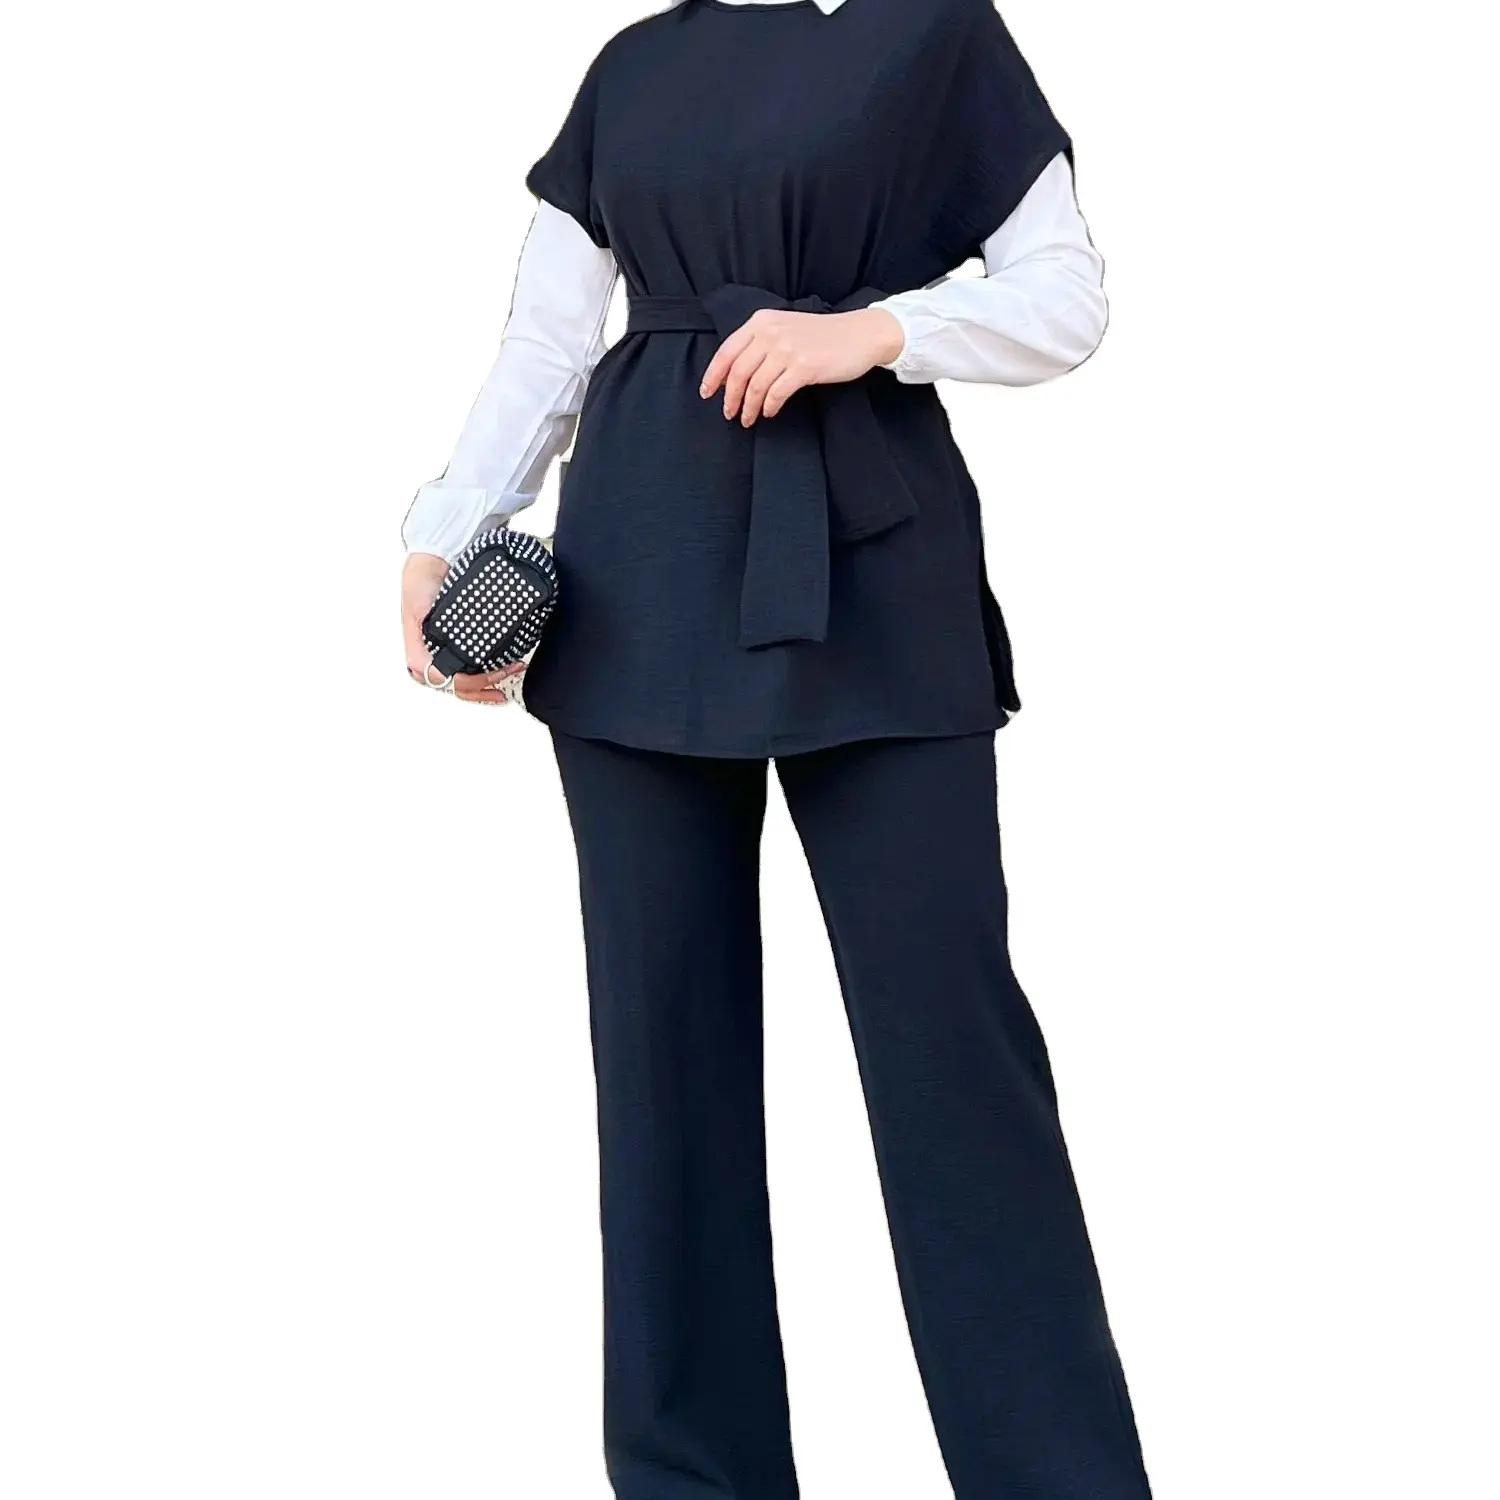 Black Blouse And Trousers Combination Belted At The Waist, Comfortable For Daily Use Set 100% Polyester